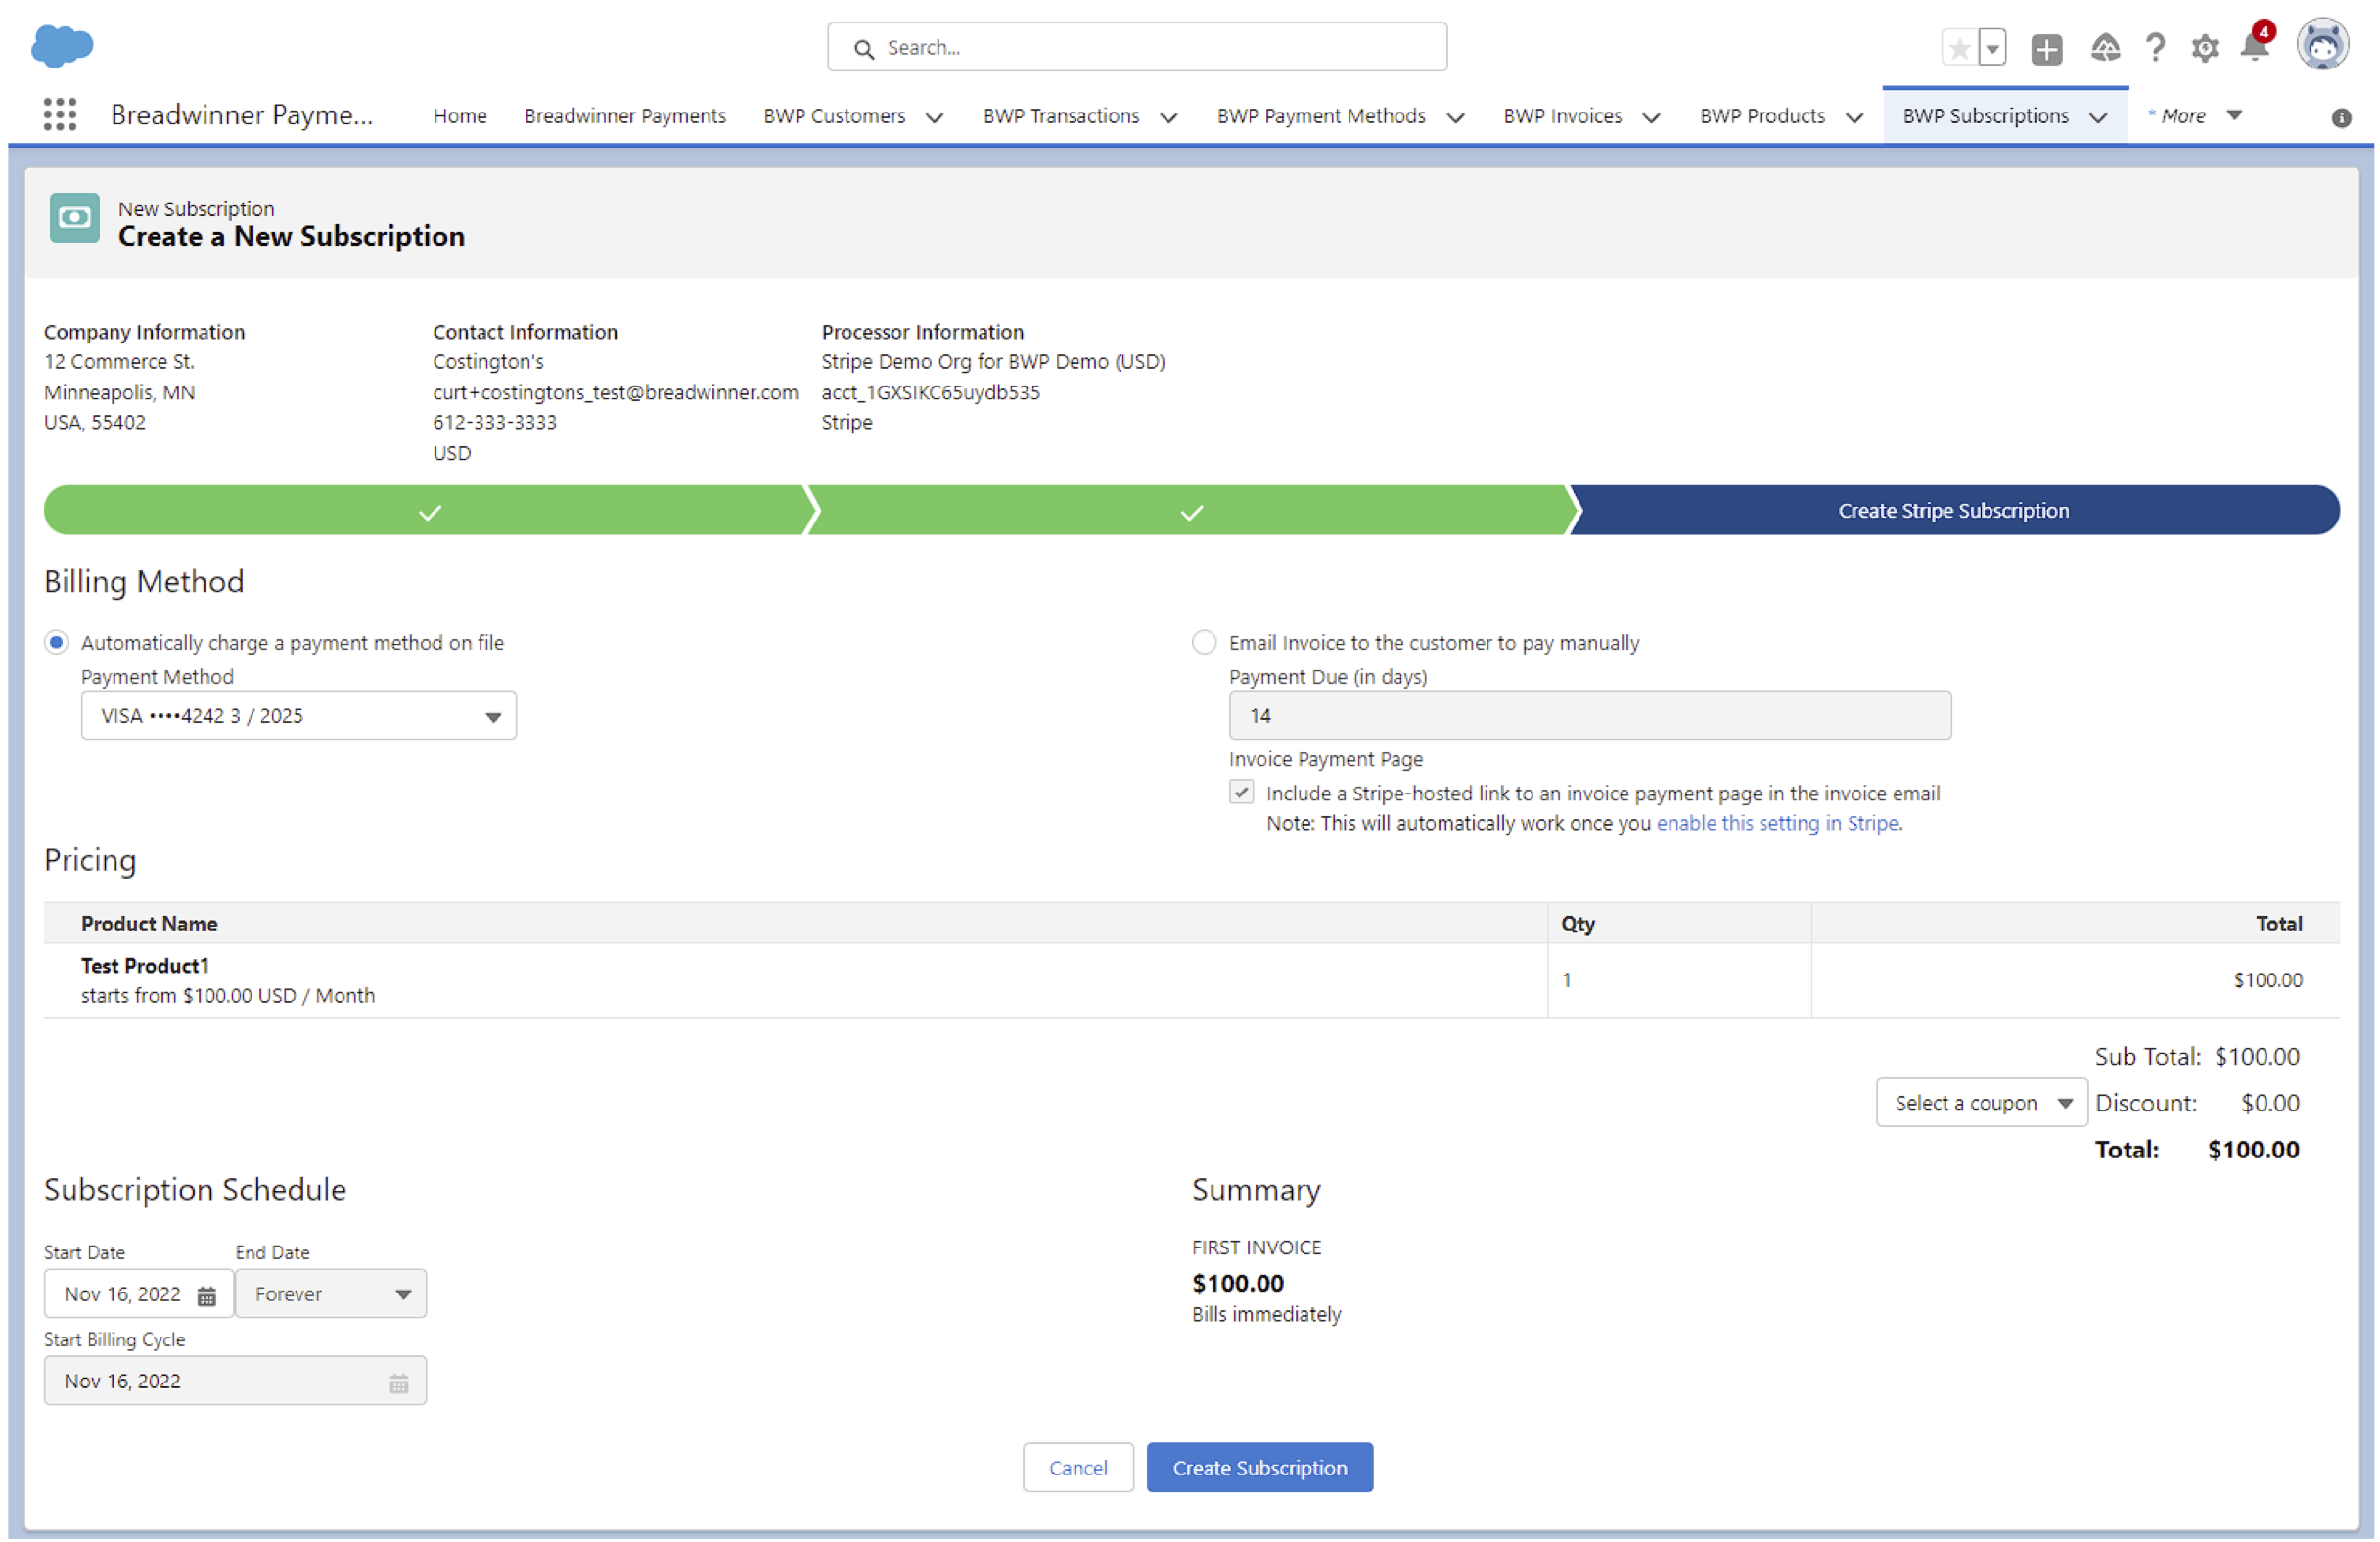 Create New Subscription in Salesforce